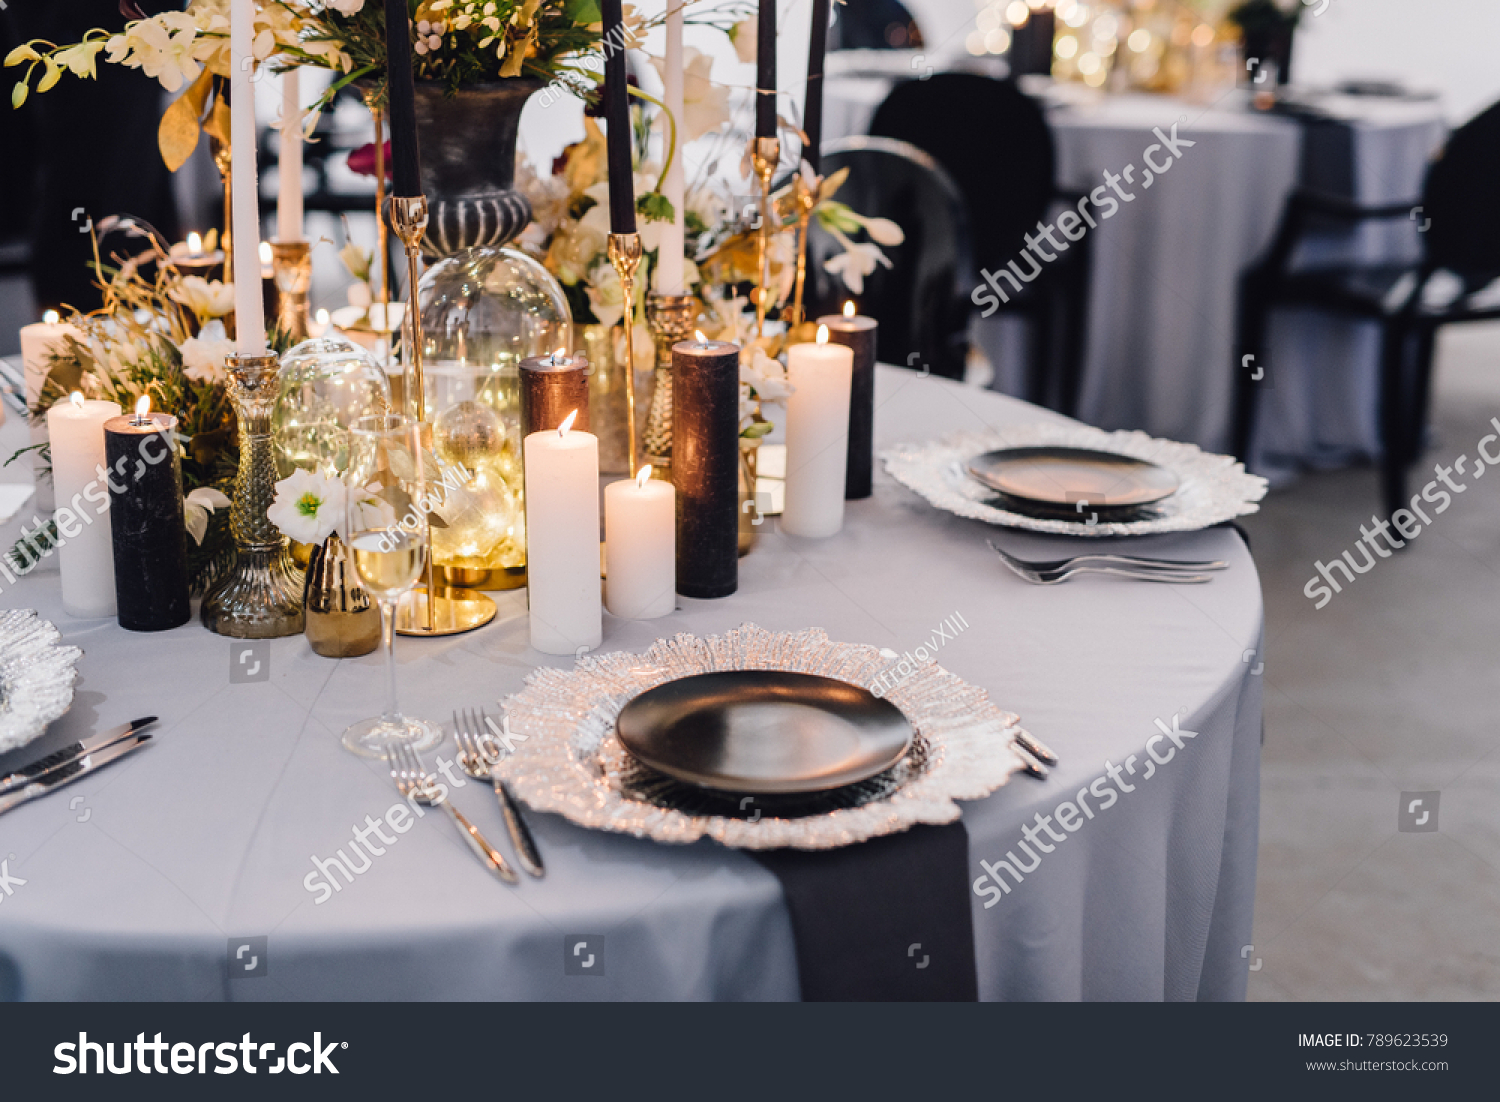 Dinner table decorated by candles and flowers. Wedding. Decor #789623539